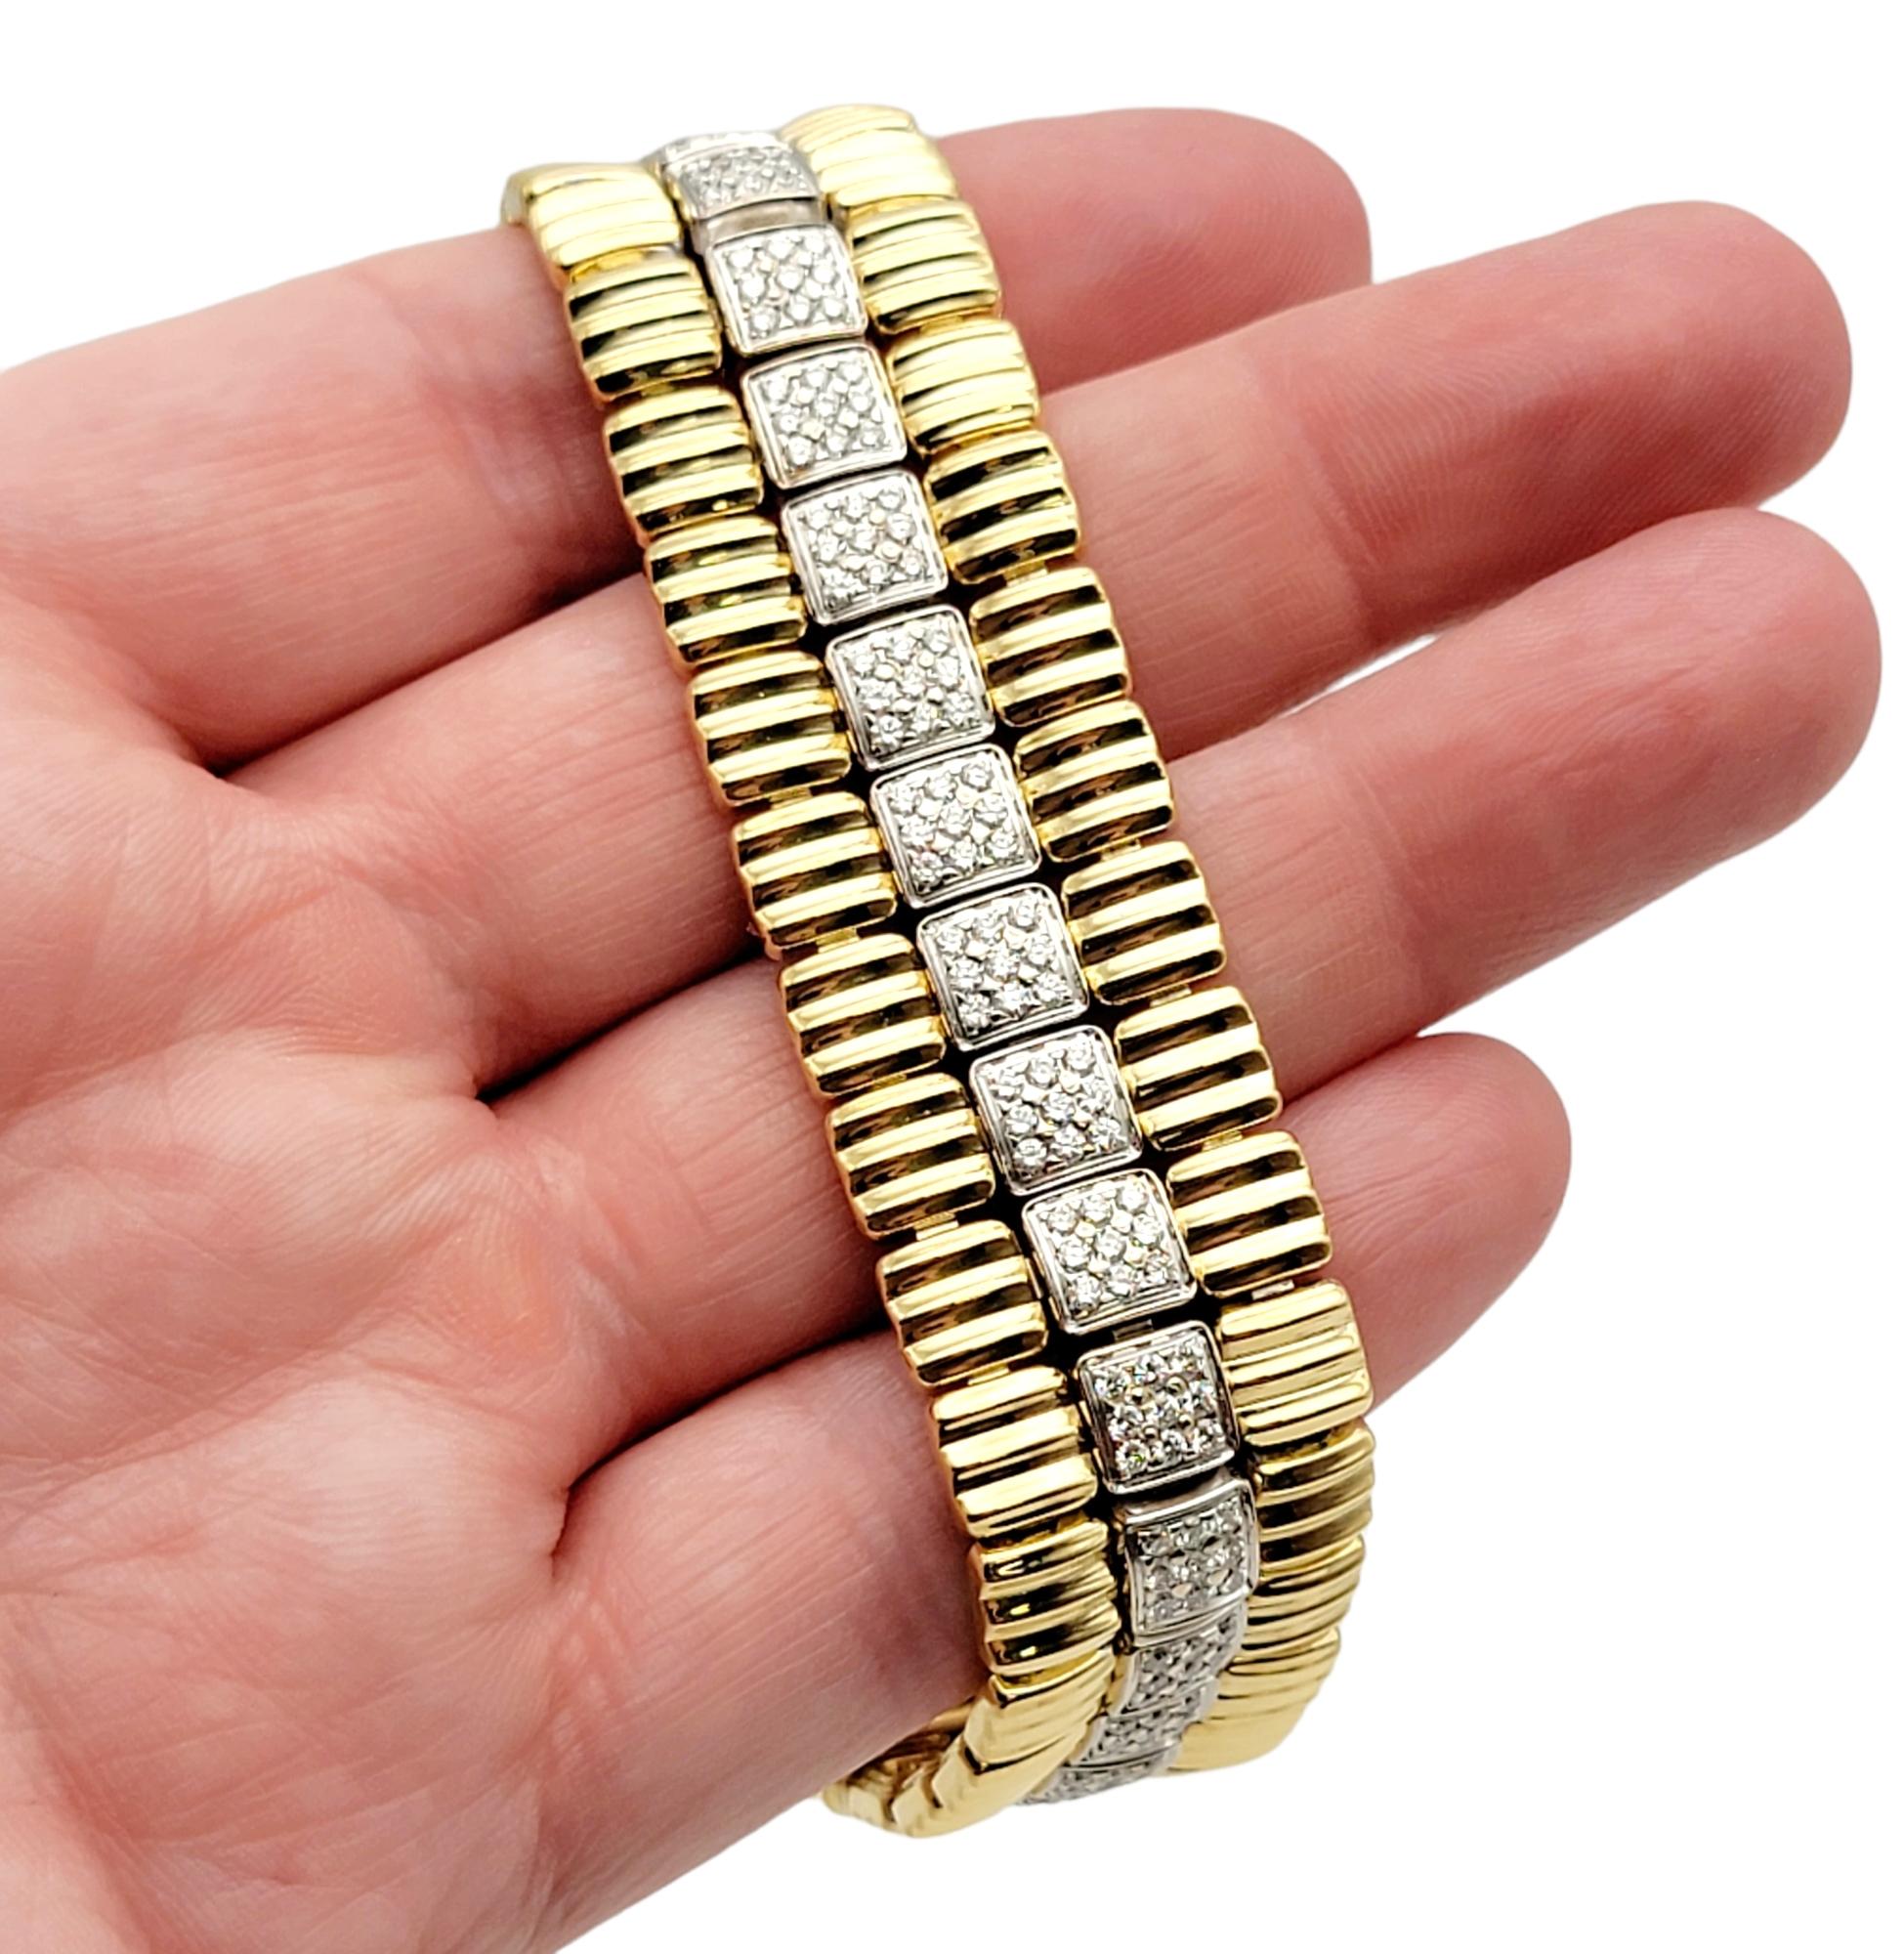 Chimento 3.00 Carat Total Diamond Link Bracelet 18 Karat White and Yellow Gold In Good Condition For Sale In Scottsdale, AZ